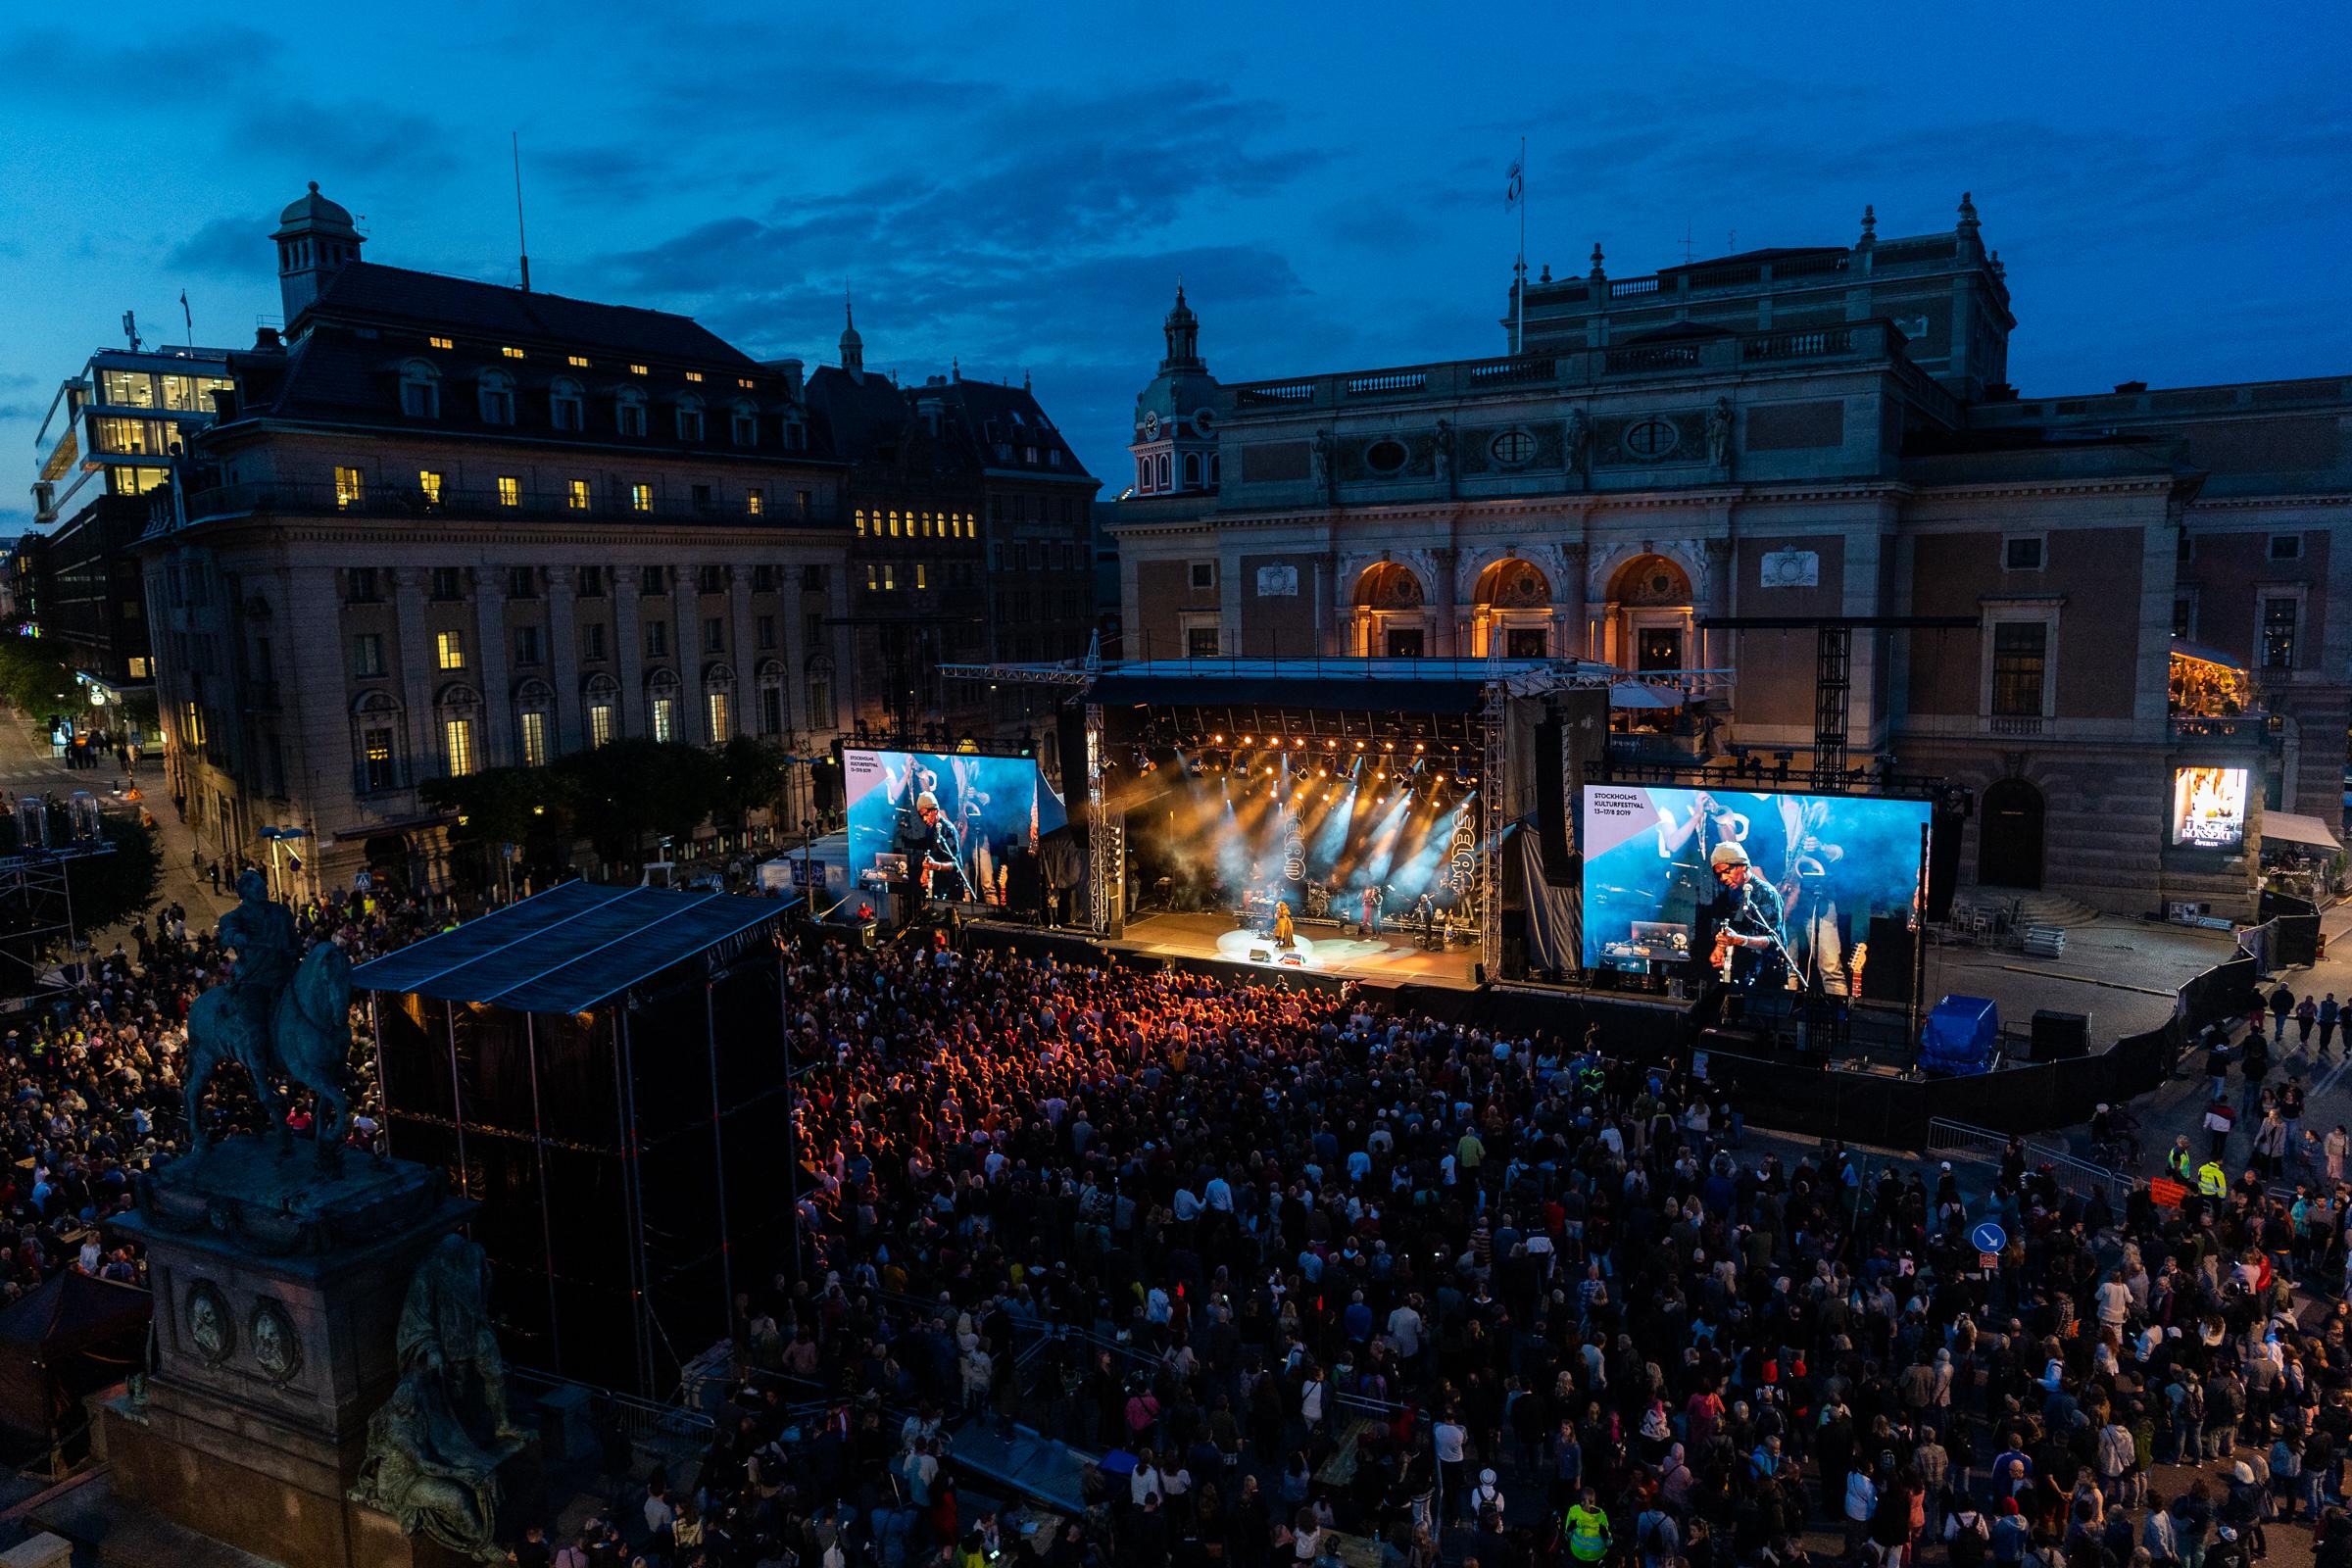 A view of the culture festival in Stockholm